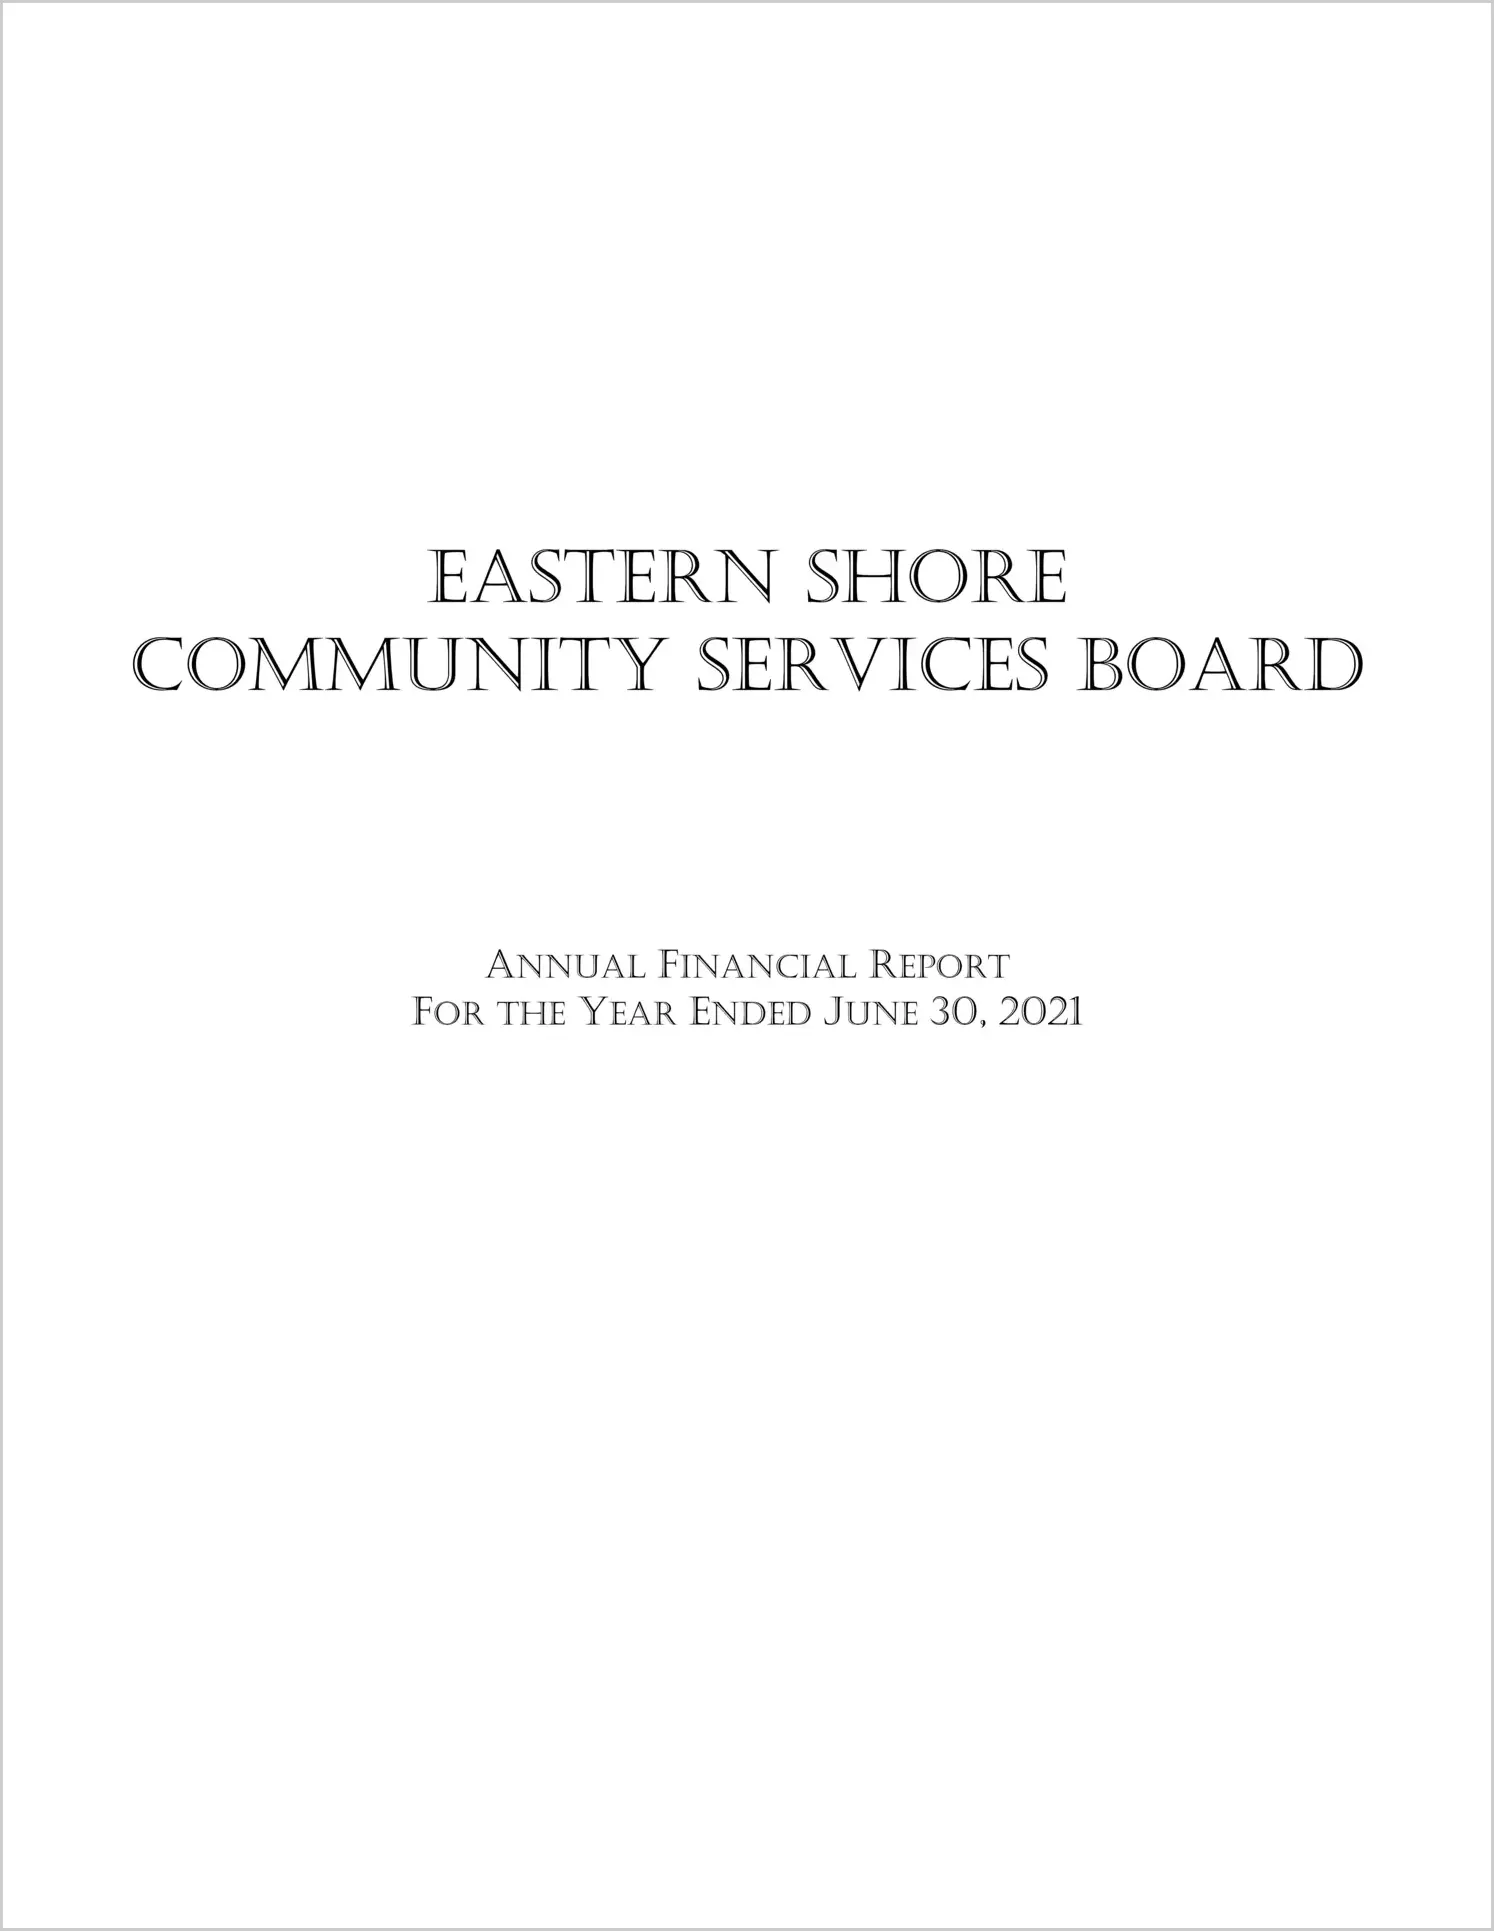 2021 ABC/Other Annual Financial Report  for Eastern Shore Community Services Board